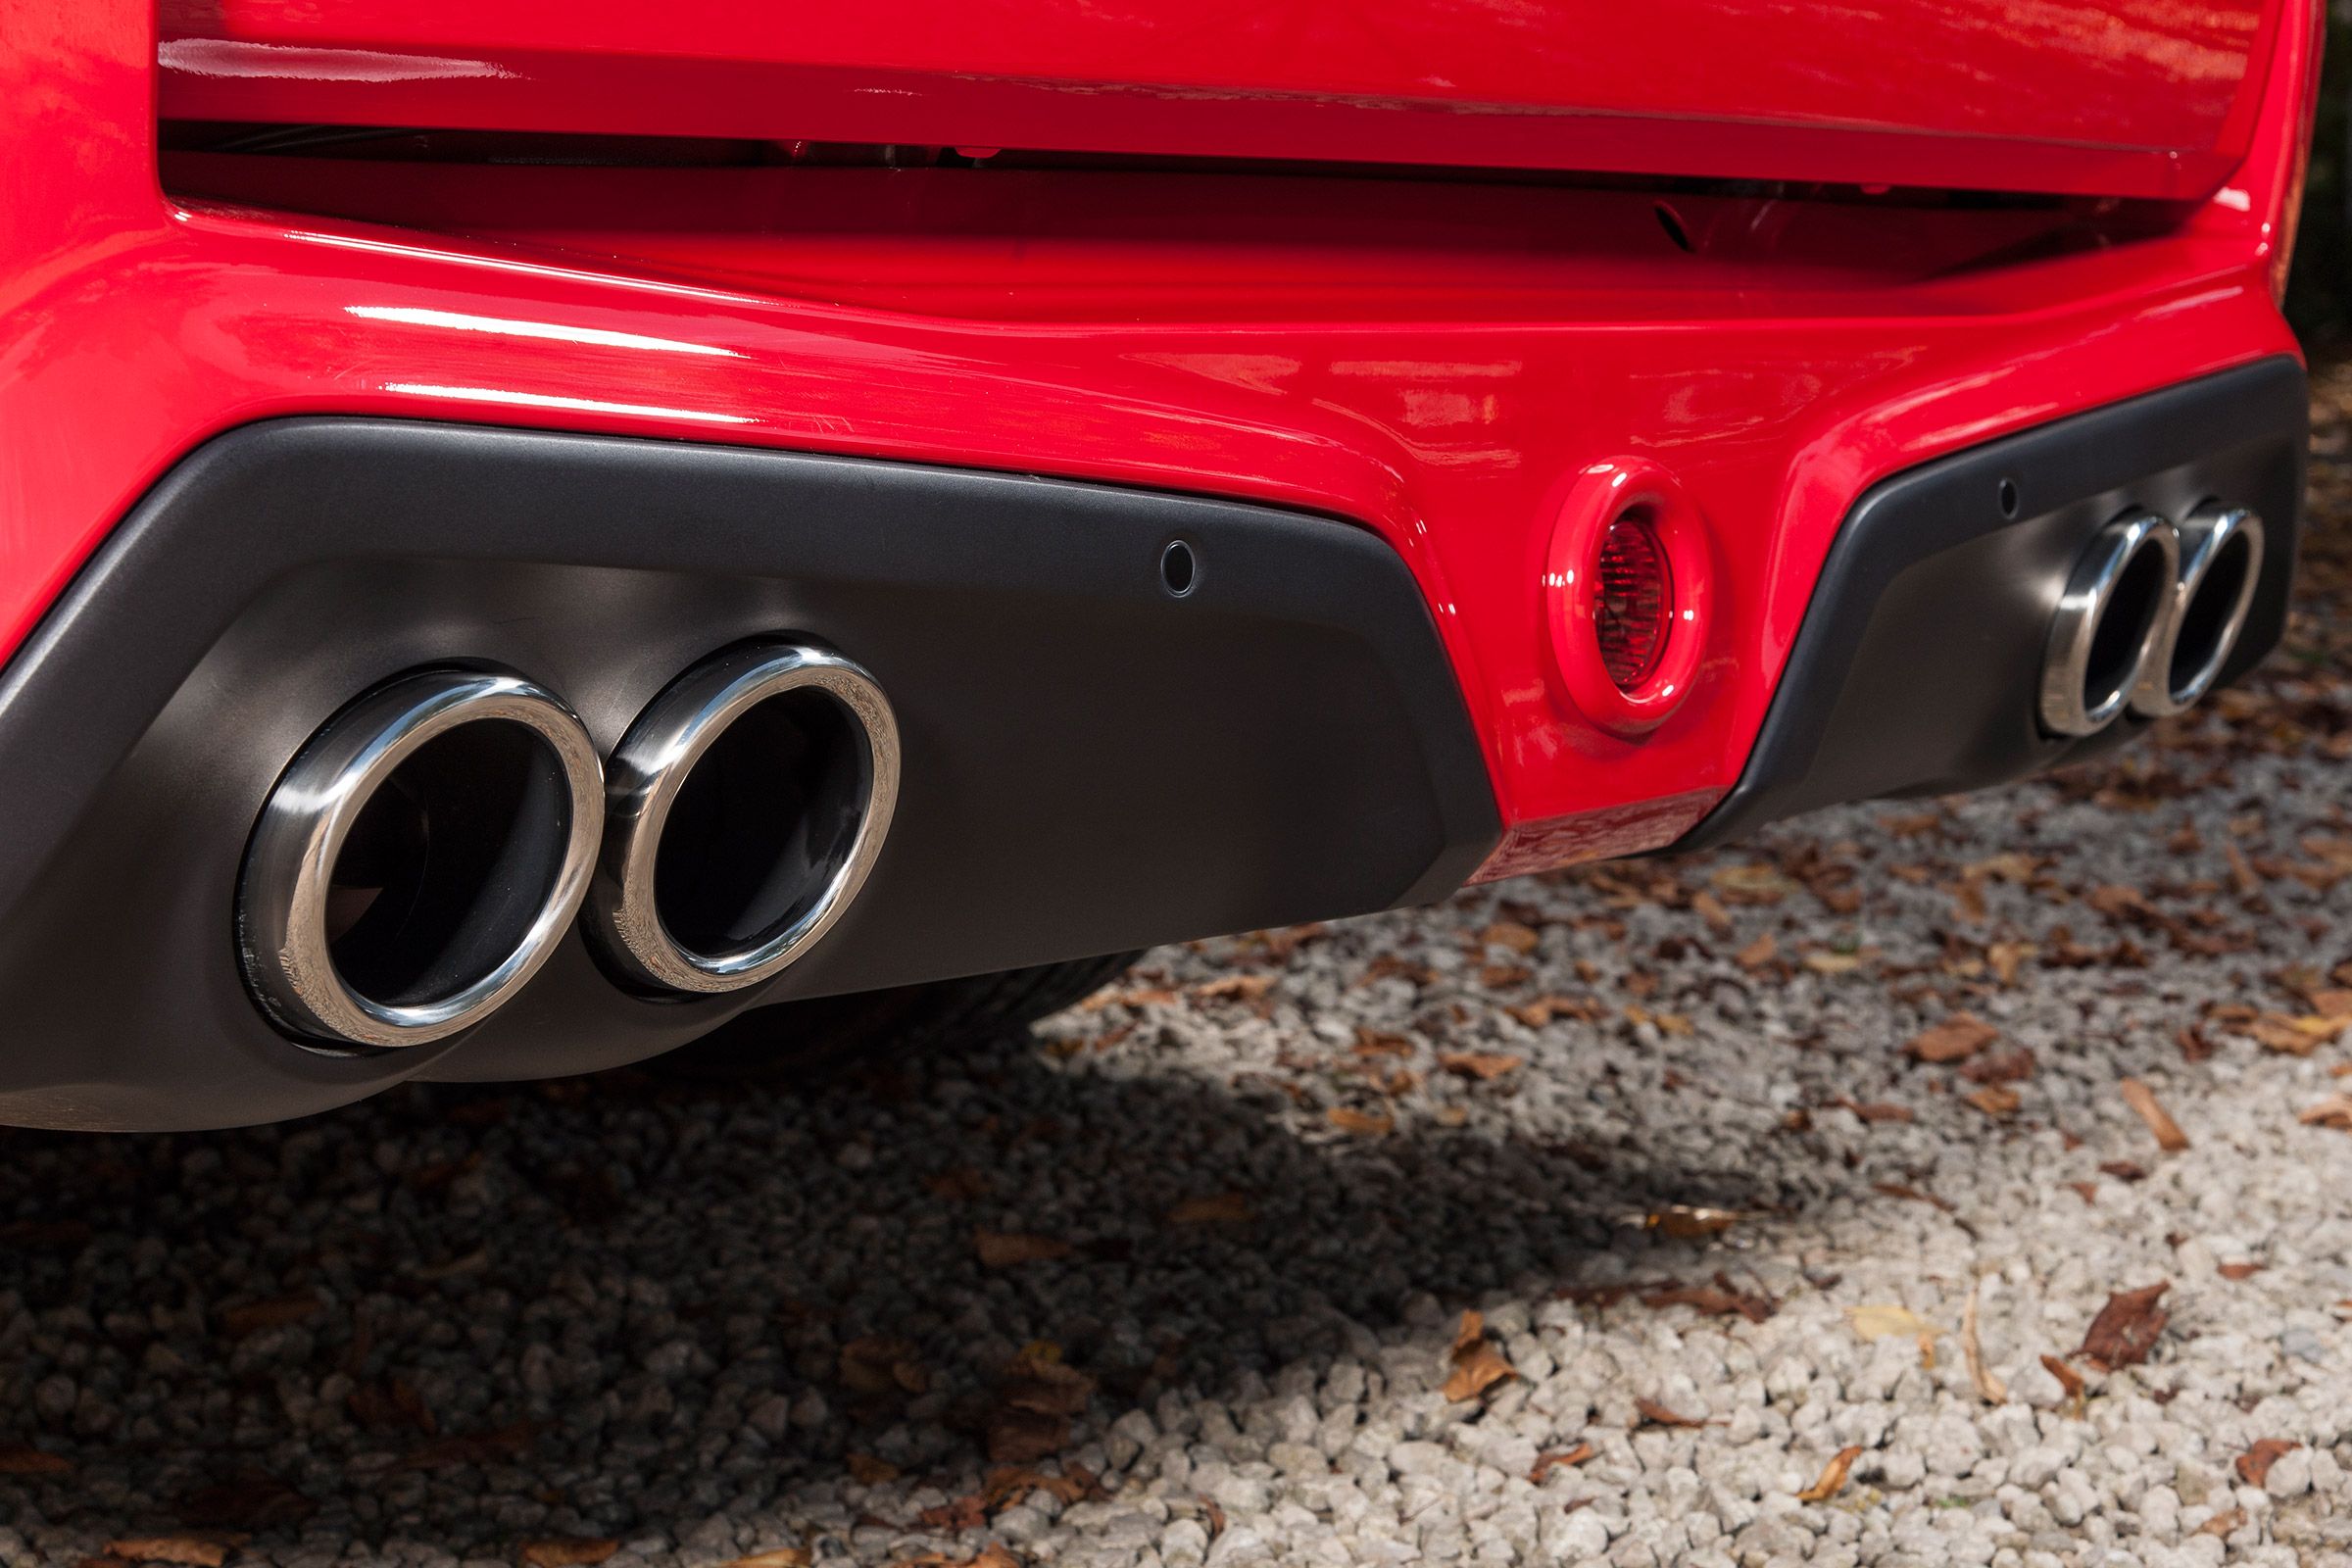 2017 Vauxhall VXR8 Maloo Exterior View Rear Bumper And Exhaust Pipe (View 9 of 26)